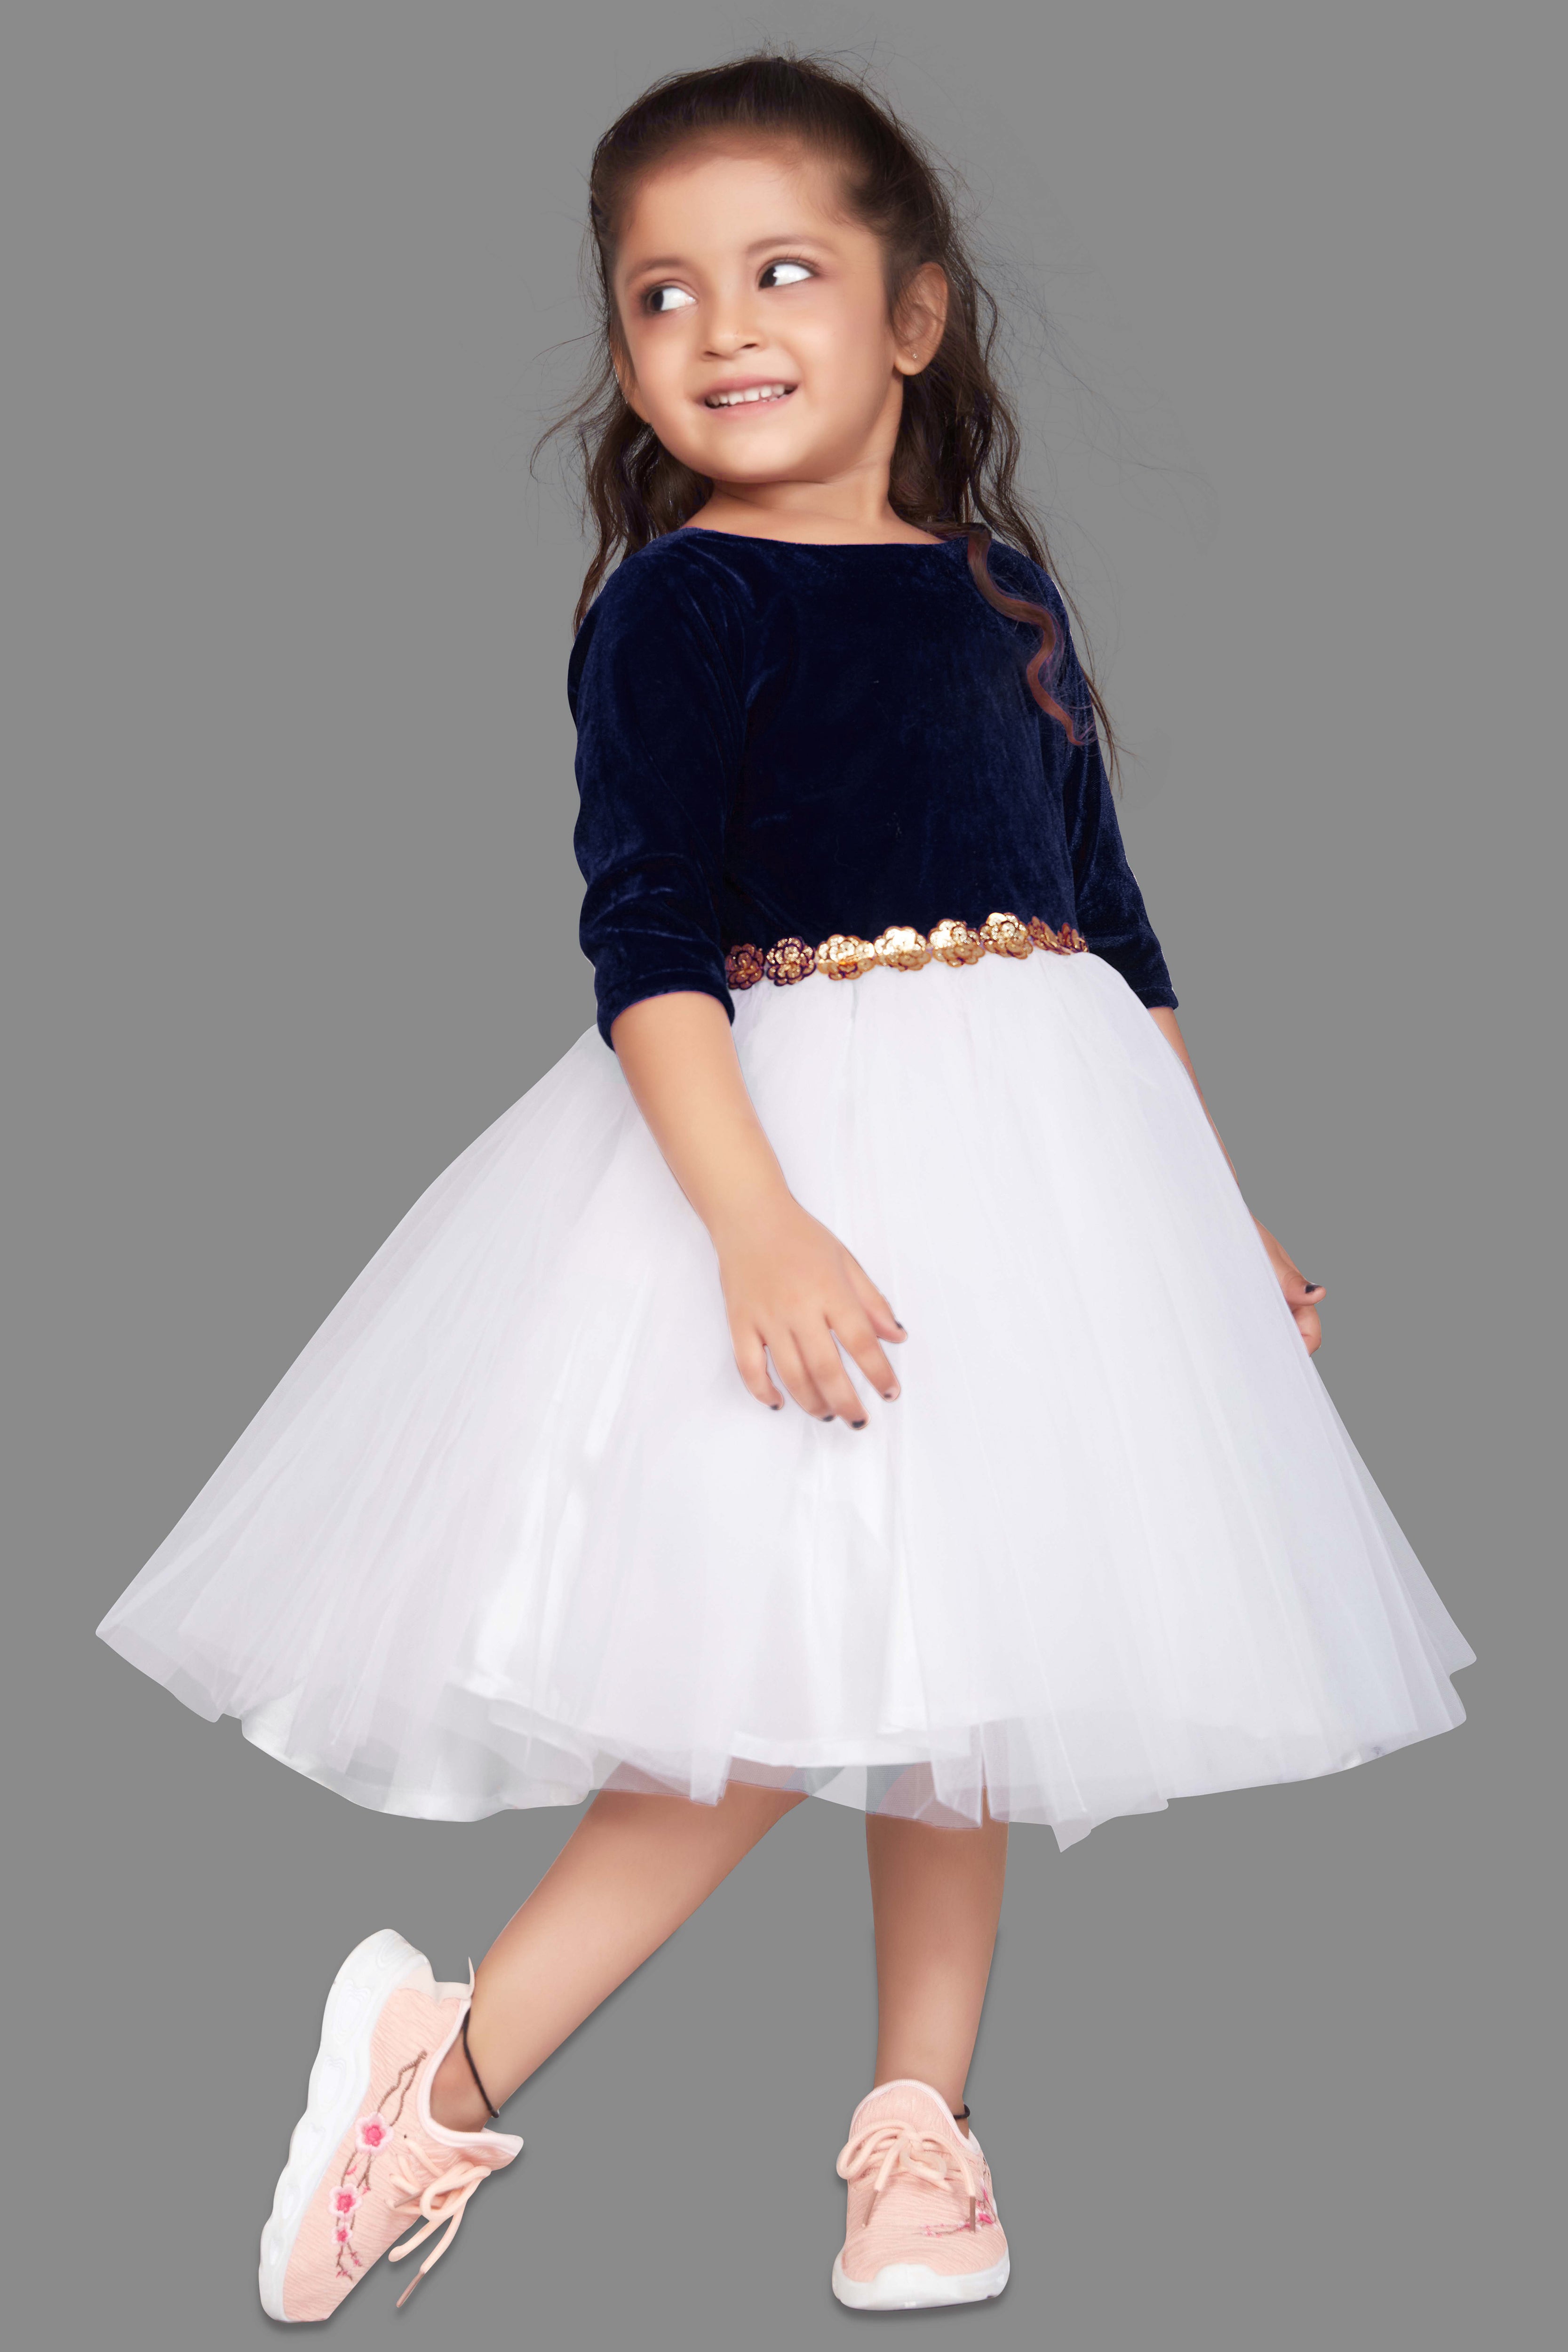 Princess Dark Red Velvet Ball Gown Flower Girl Dress With Short Puffy  Sleeves Perfect For Weddings, Birthdays, And Special Occasions At An  Affordable Price From Weddingpalacedress, $83.43 | DHgate.Com